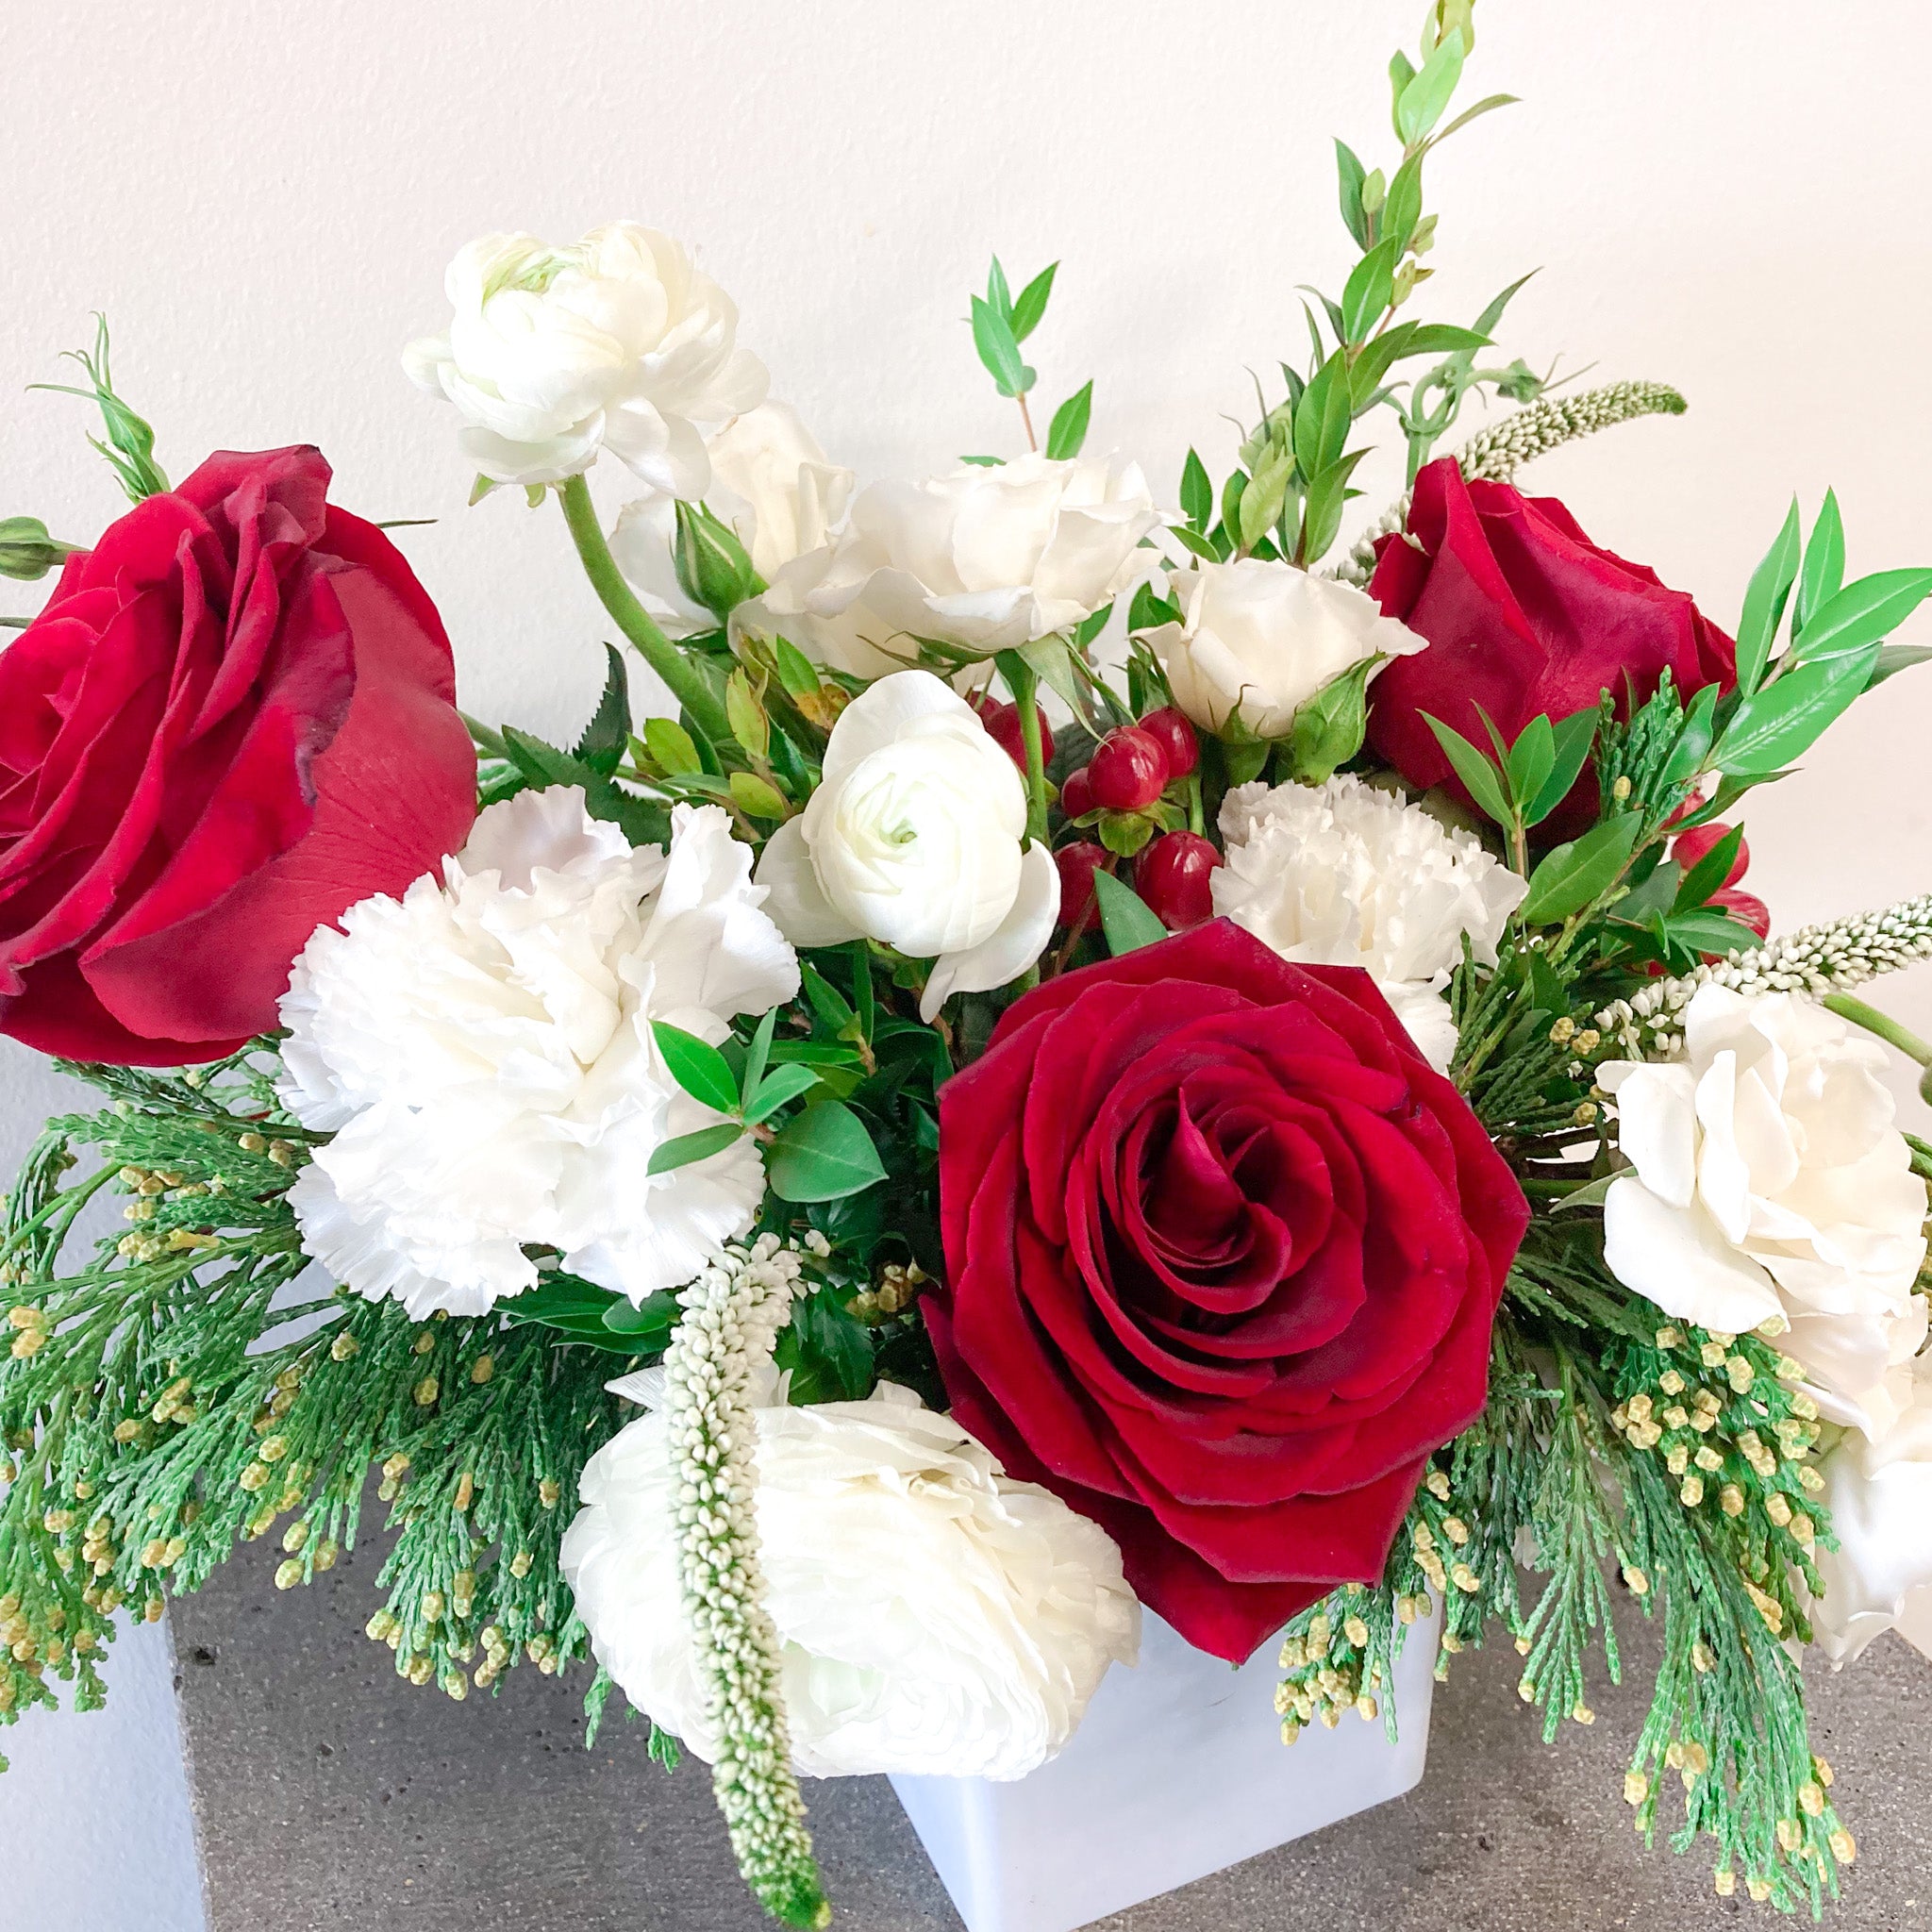 Candy Cane - Winter Seasonal Florist Design in Reds + Whites